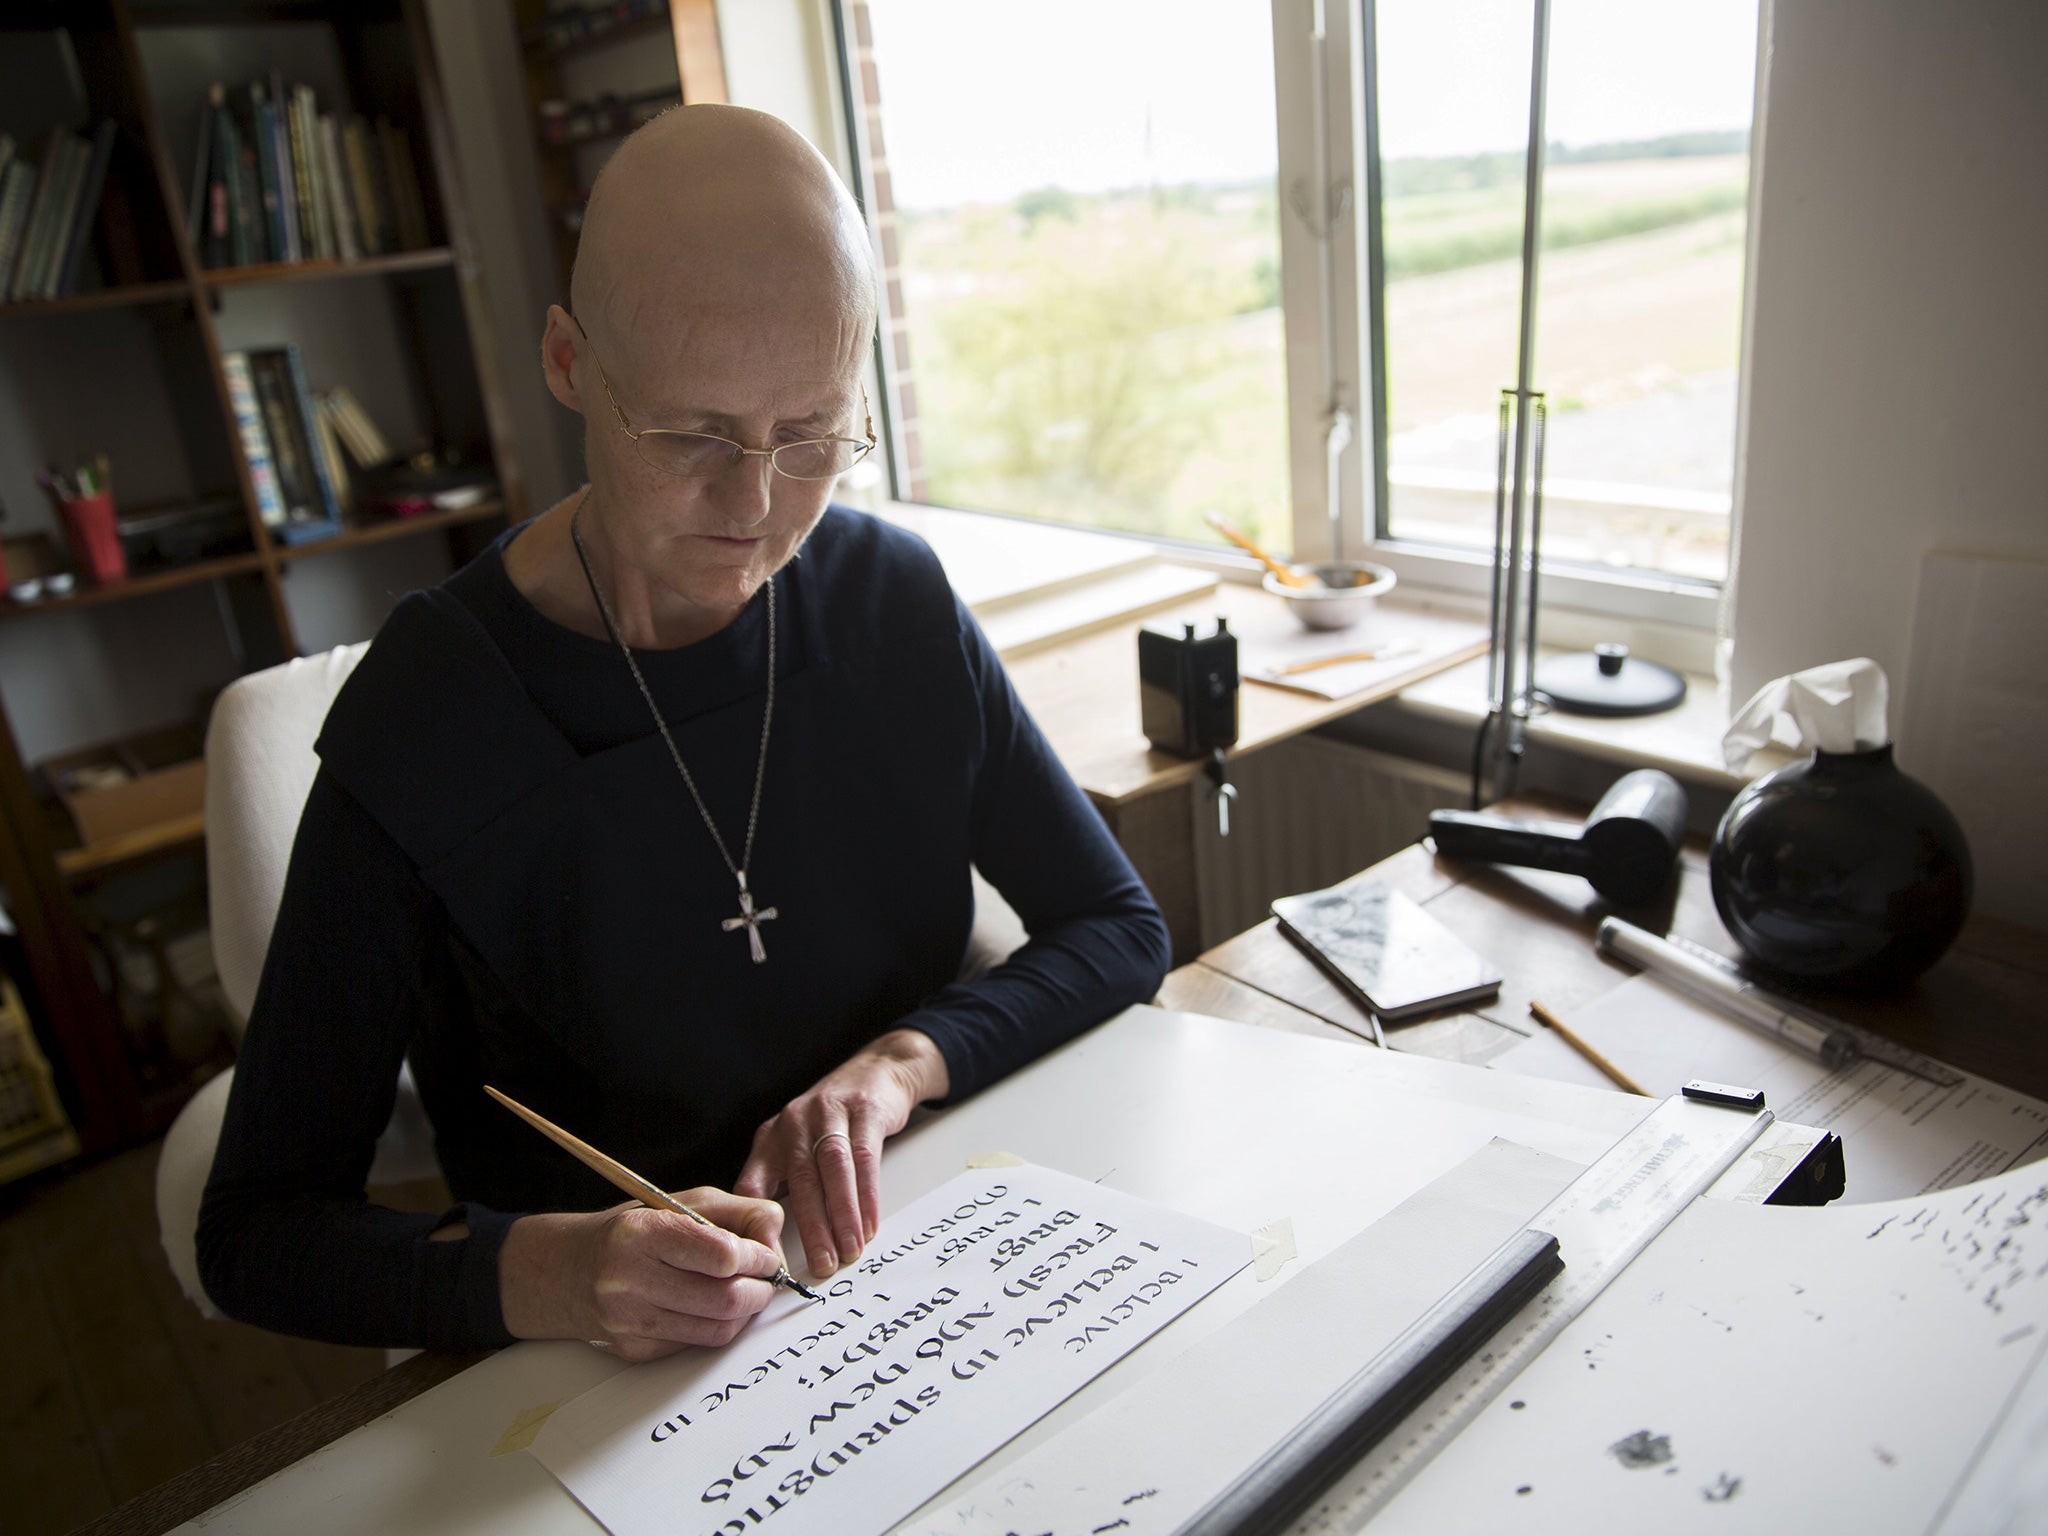 Sister Rachel Denton, in her end-of-terrace St Cuthbert’s Hermitage, earns a traditional monastic living with her online calligraphy business